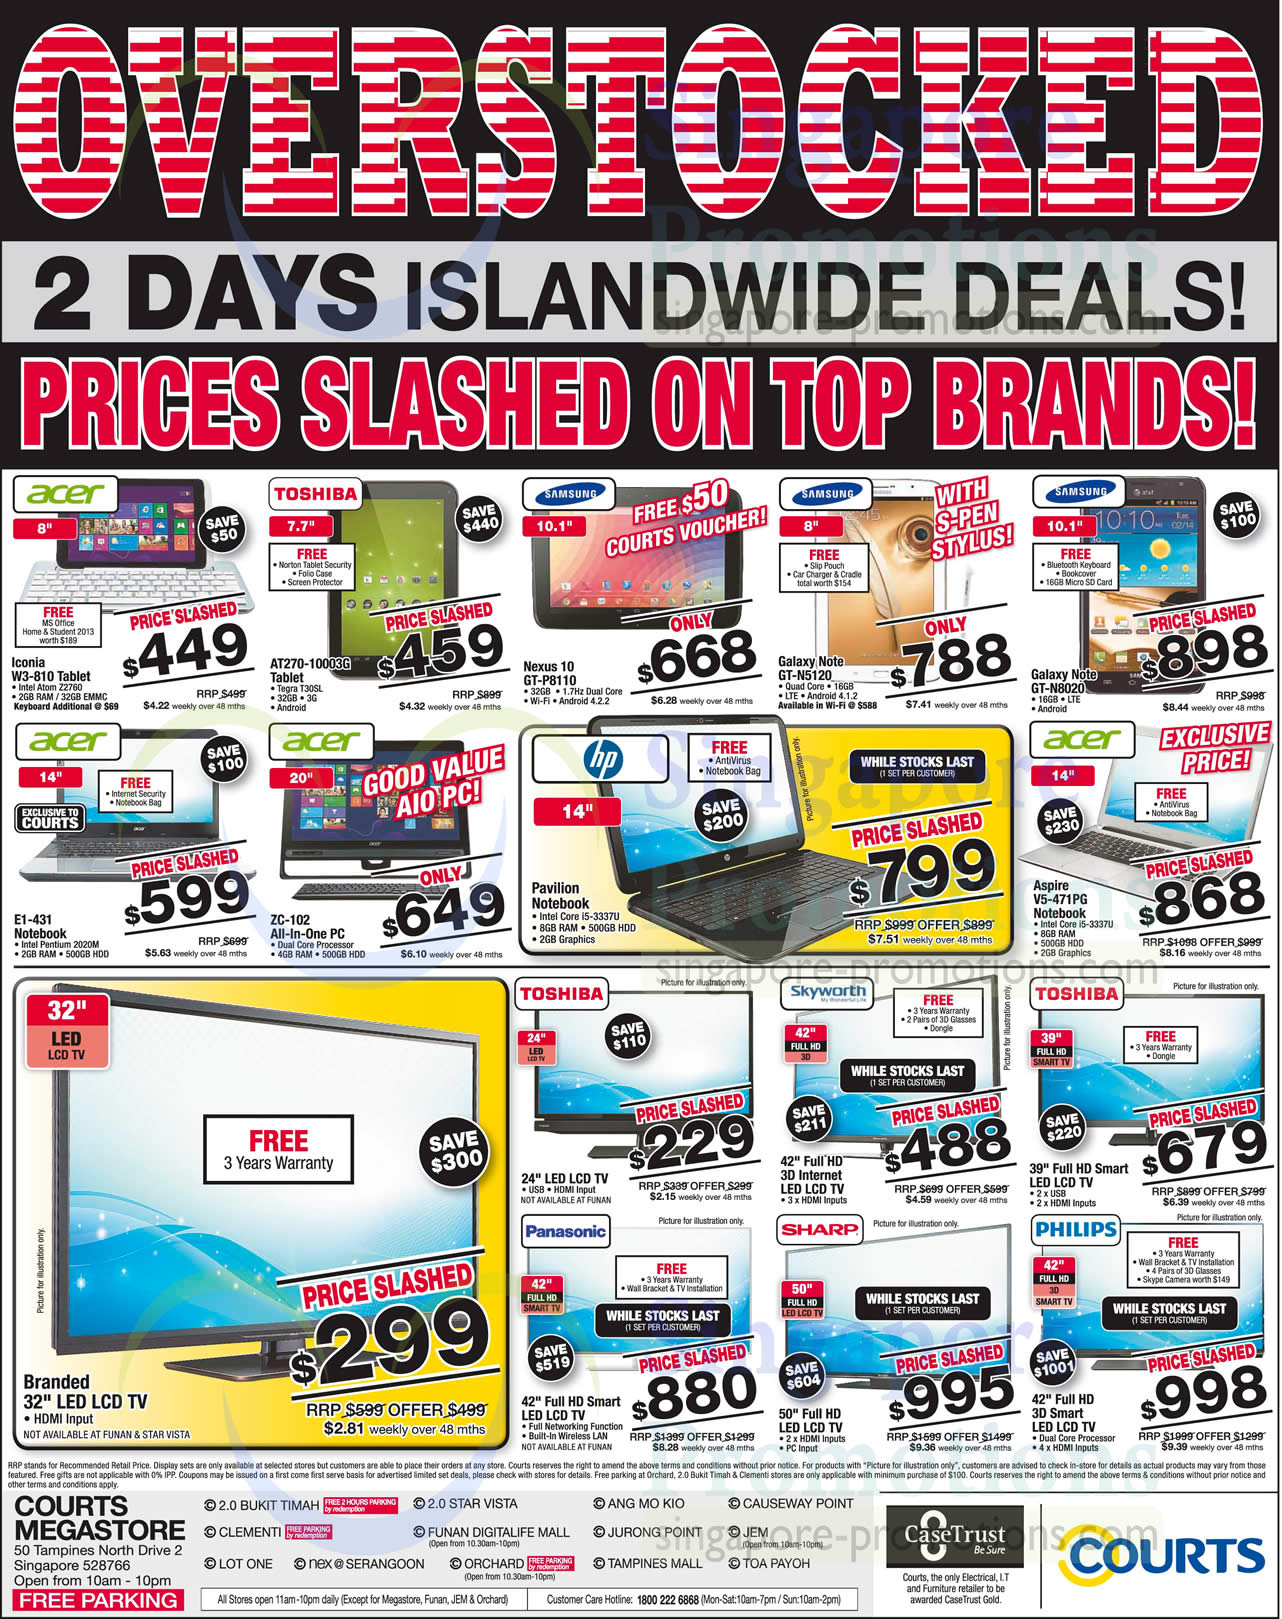 Featured image for Courts Tradeshow Overstocked Prices Slashed Two Day Offers 12 - 13 Sep 2013